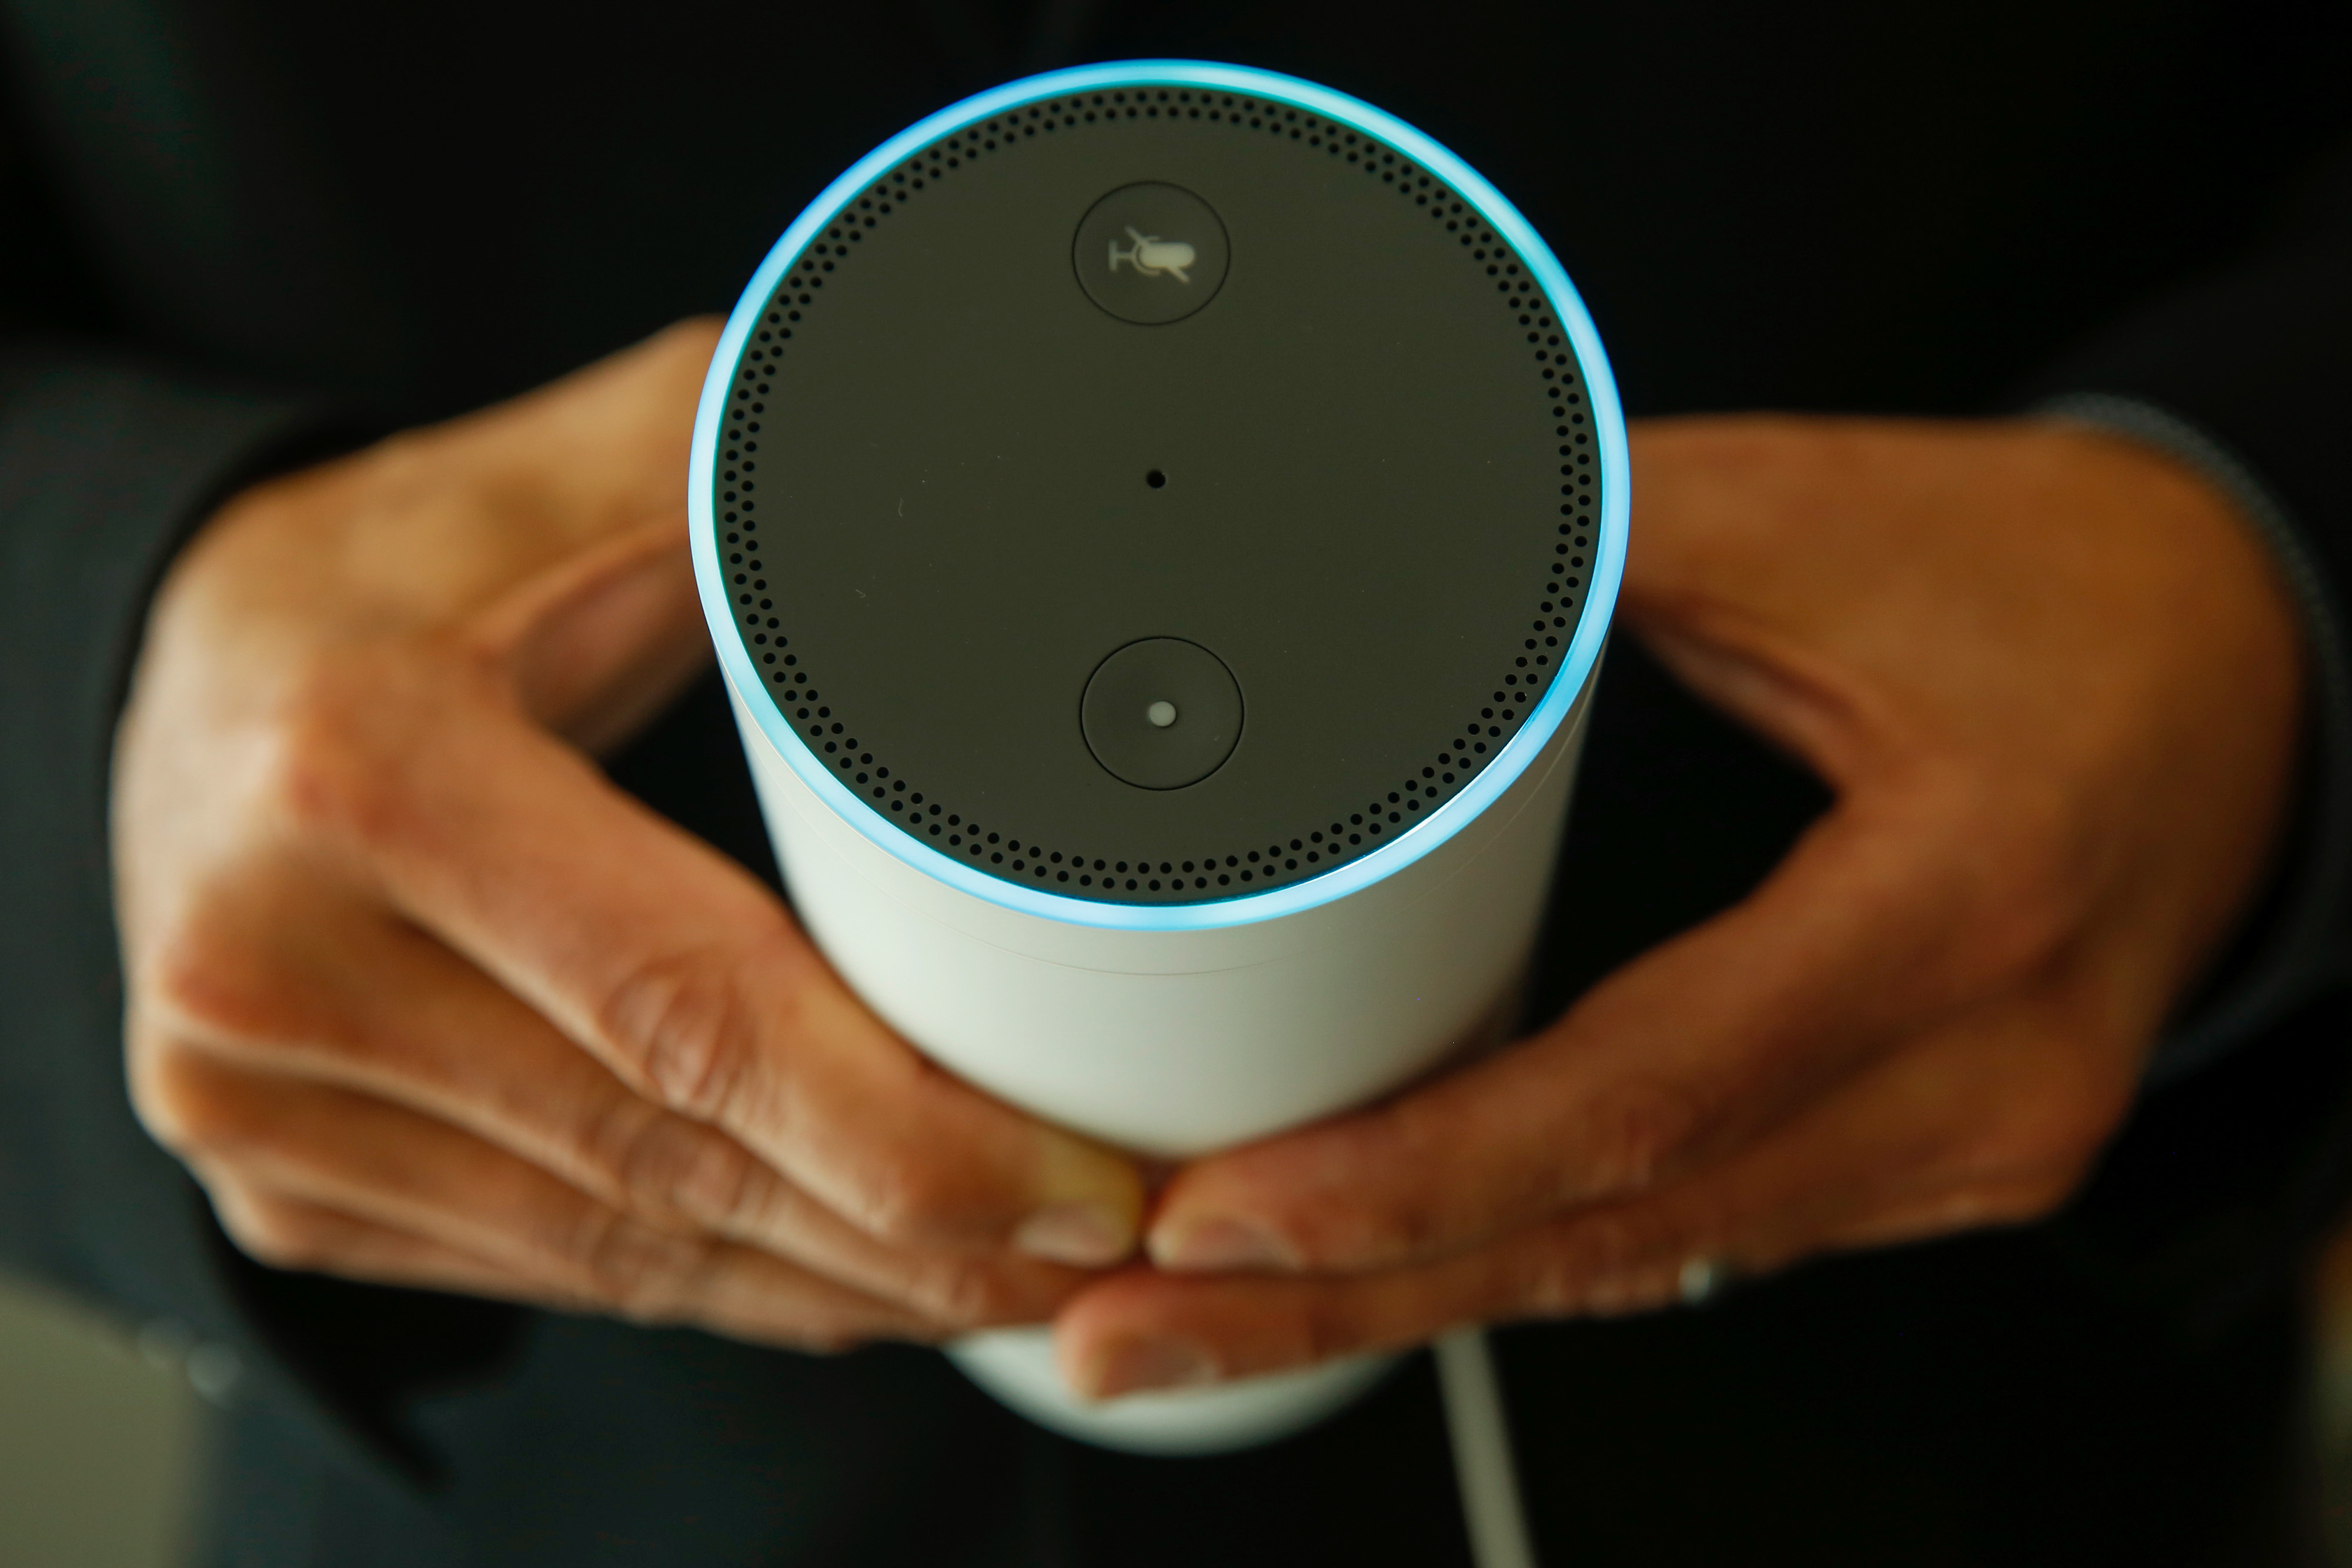 An attendee holds an Echo device during the U.K. launch event for the Amazon.com Inc. Echo voice-controlled home assistant speaker in this arranged photograph in London, U.K., on Wednesday, Sept. 14, 2016. (Bloomberg&mdash;Bloomberg via Getty Images)